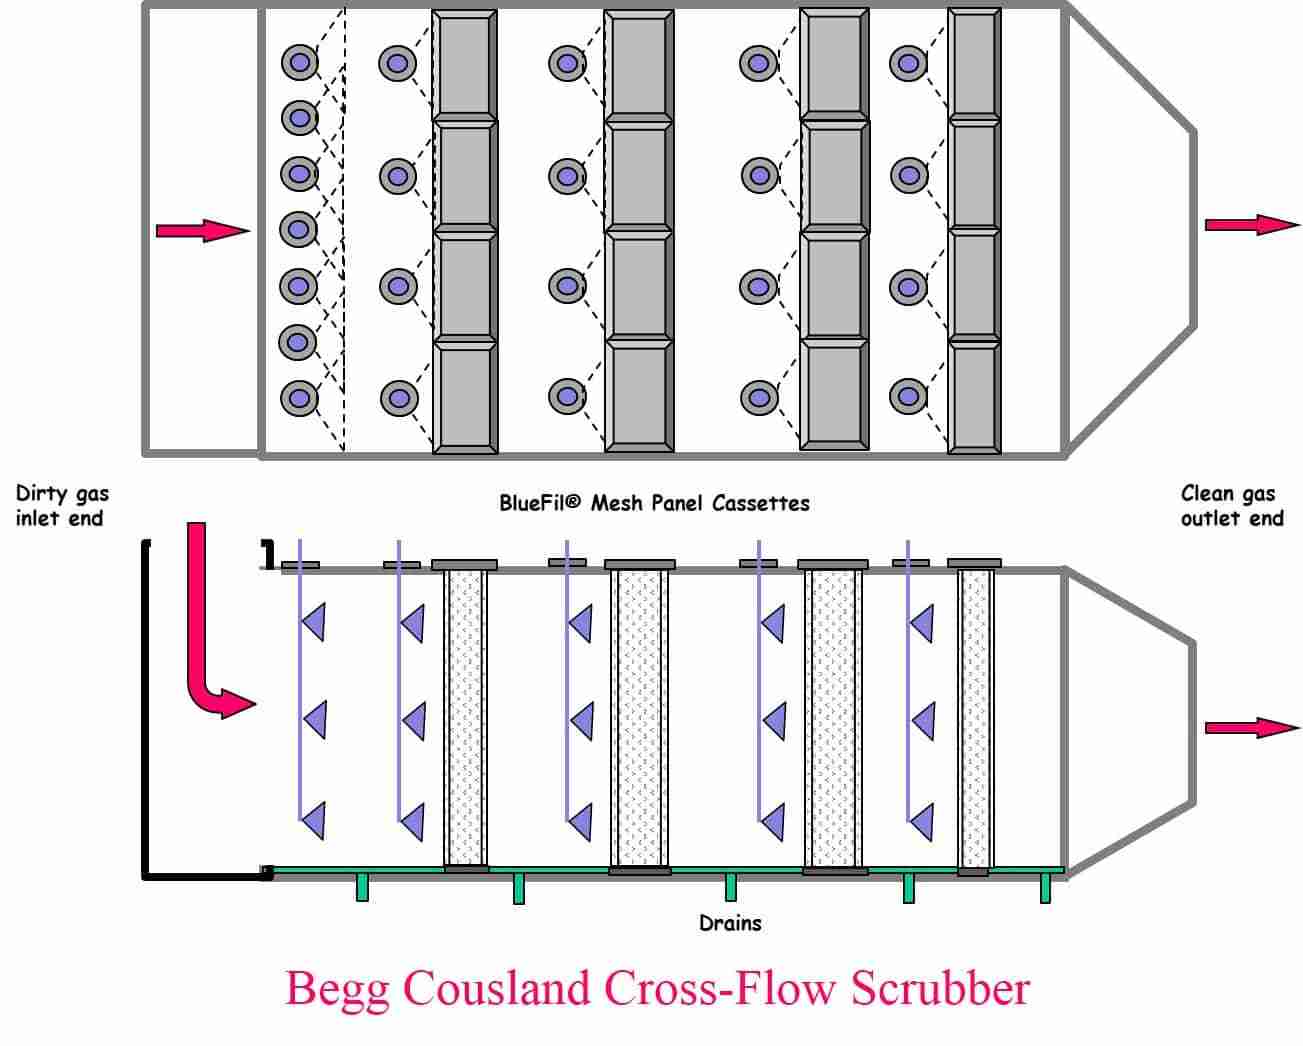 Cross flow scrubber by begg cousland